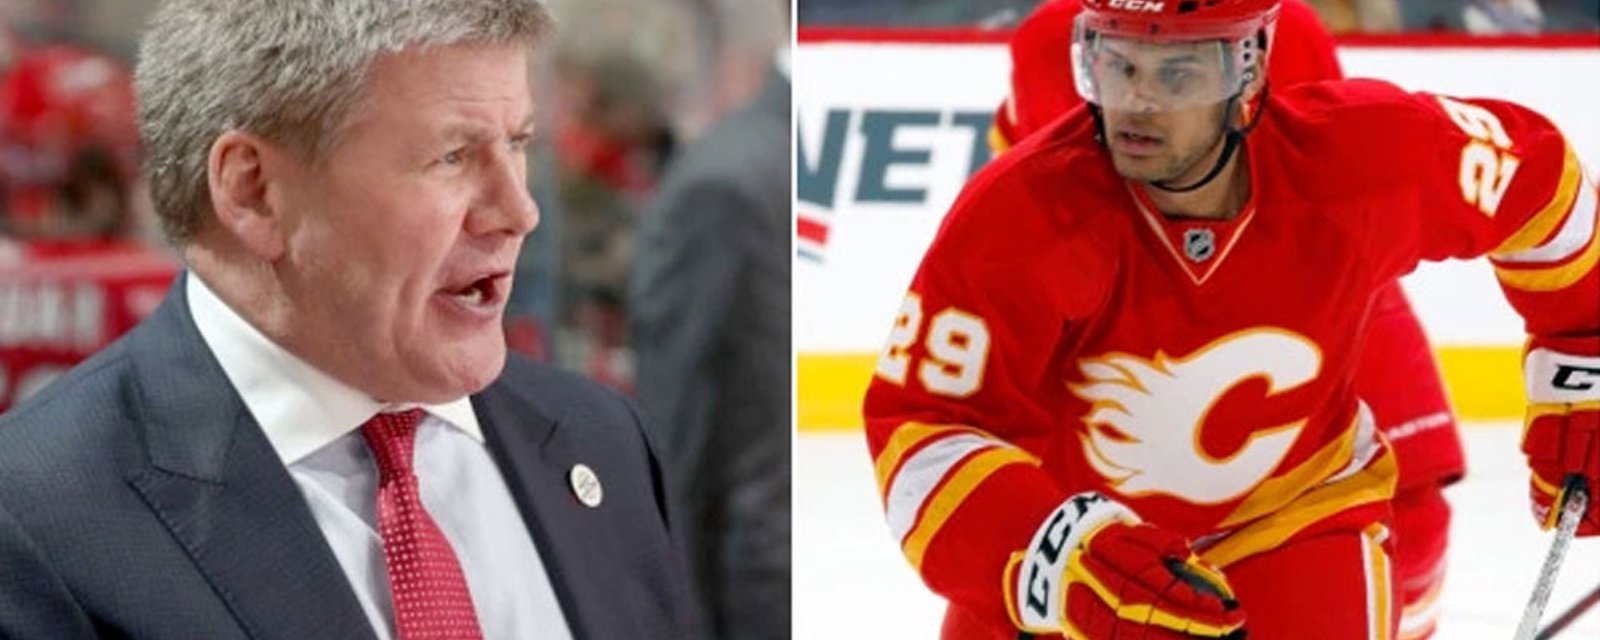 Fans call for Bill Peters to be fired after accusations of racism emerge from former player